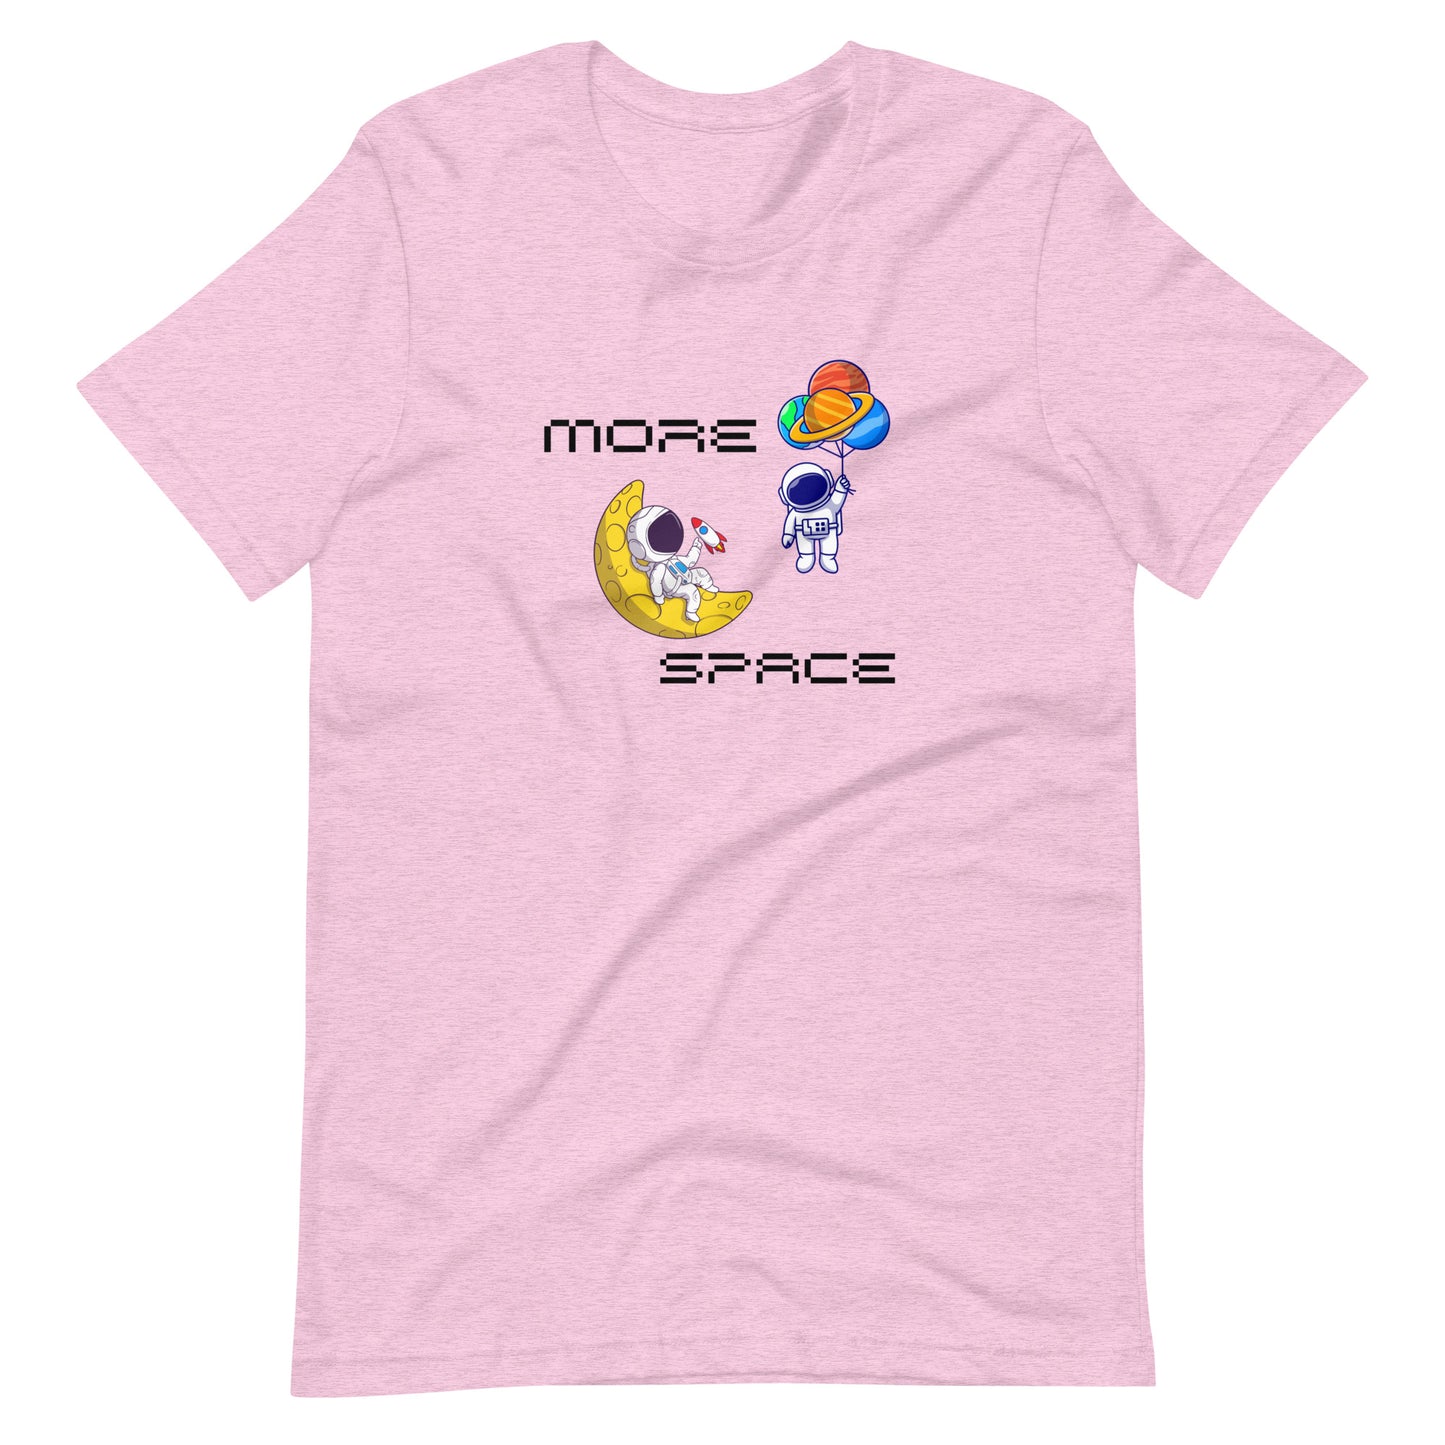 More space Unisex t-shirt